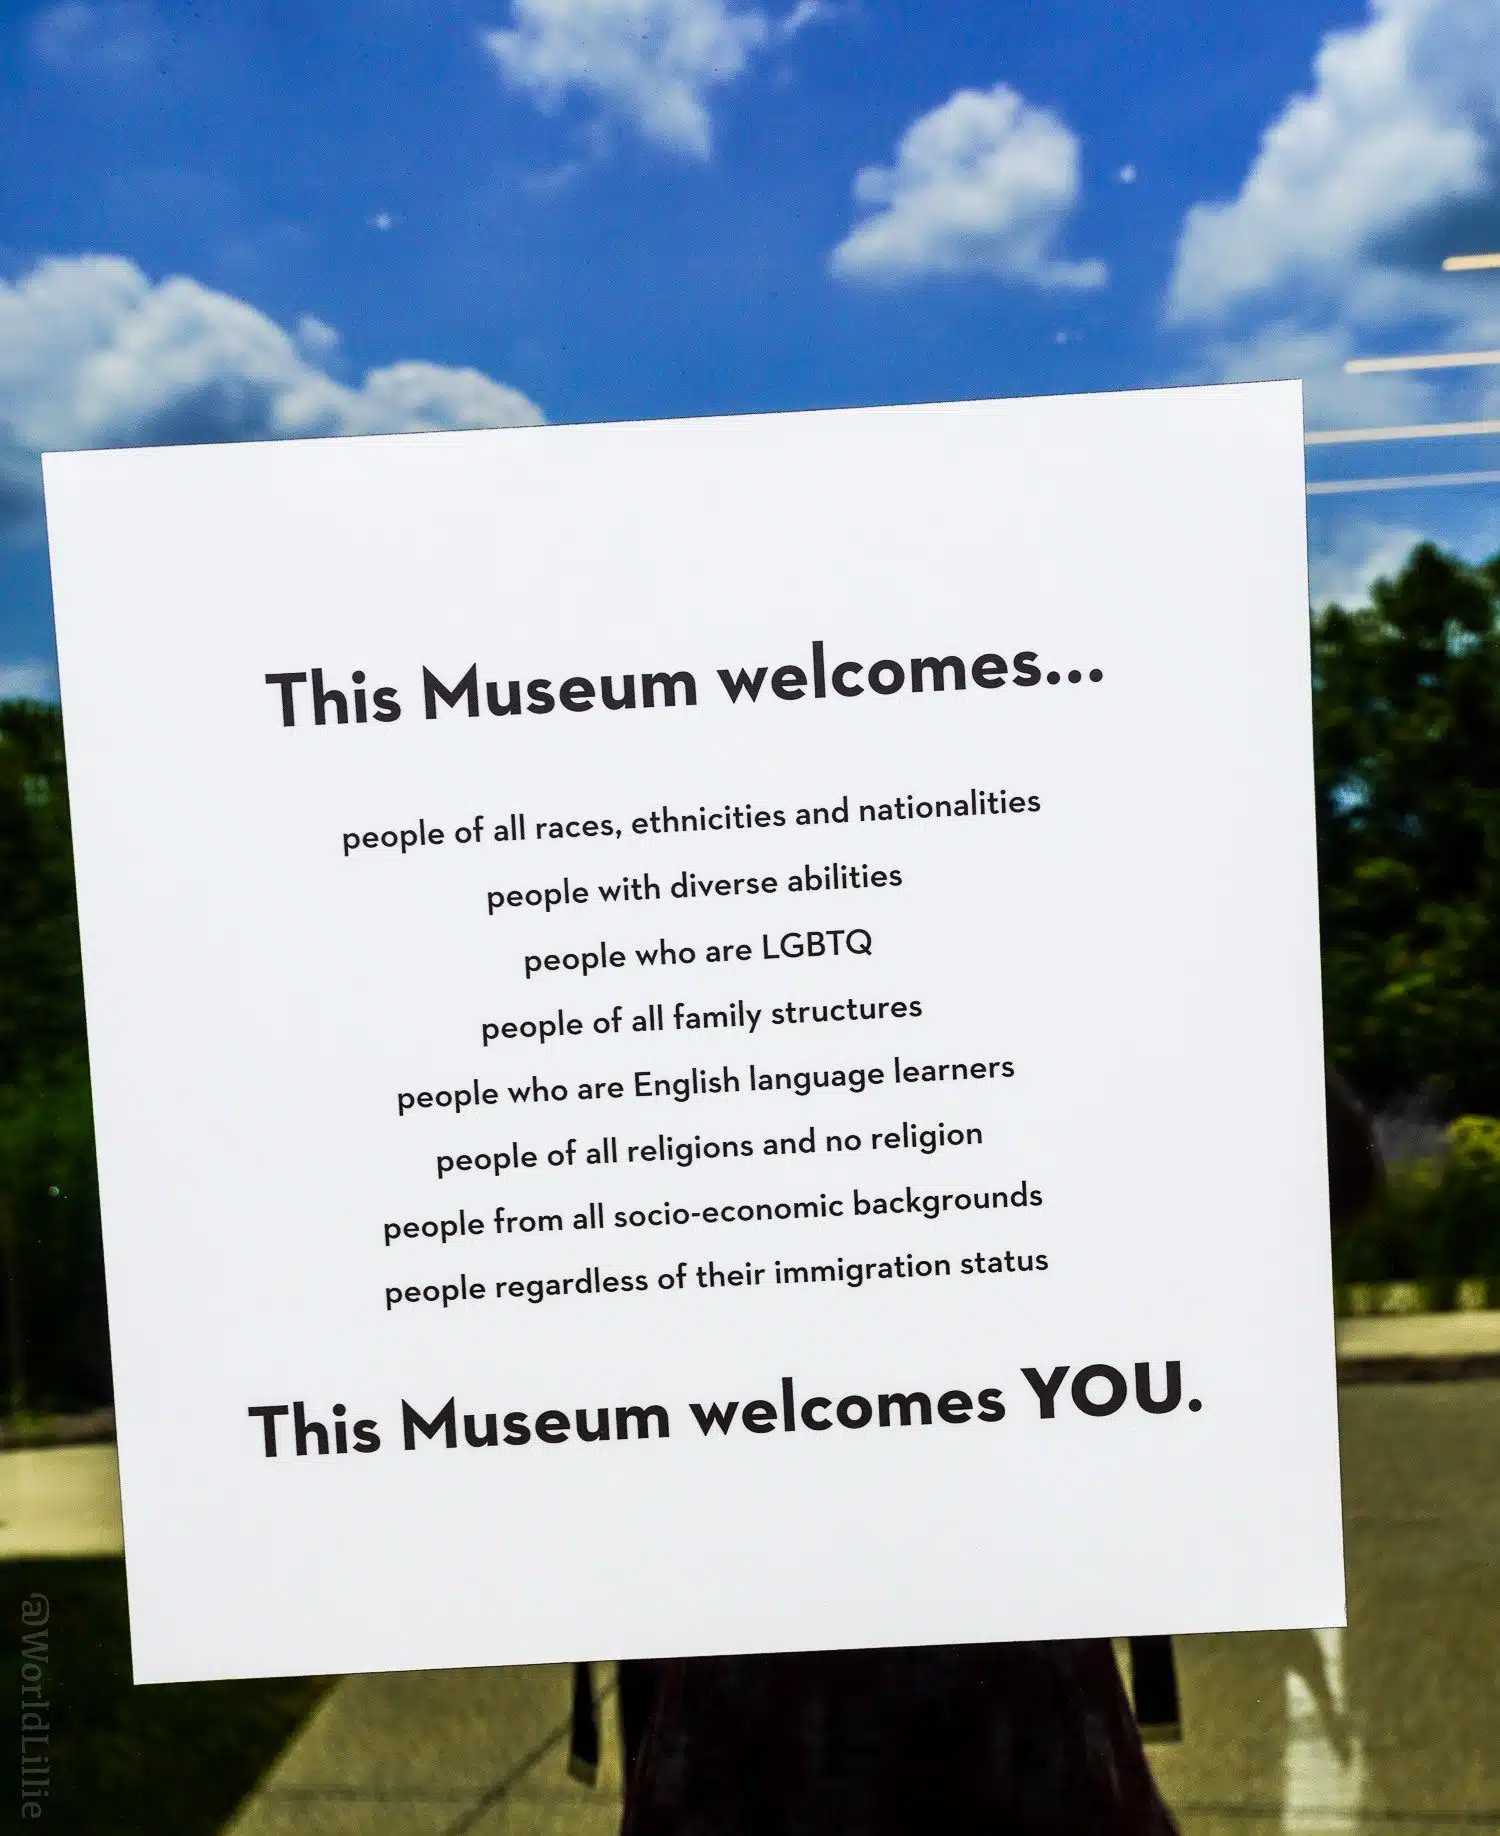 This museum welcomes YOU